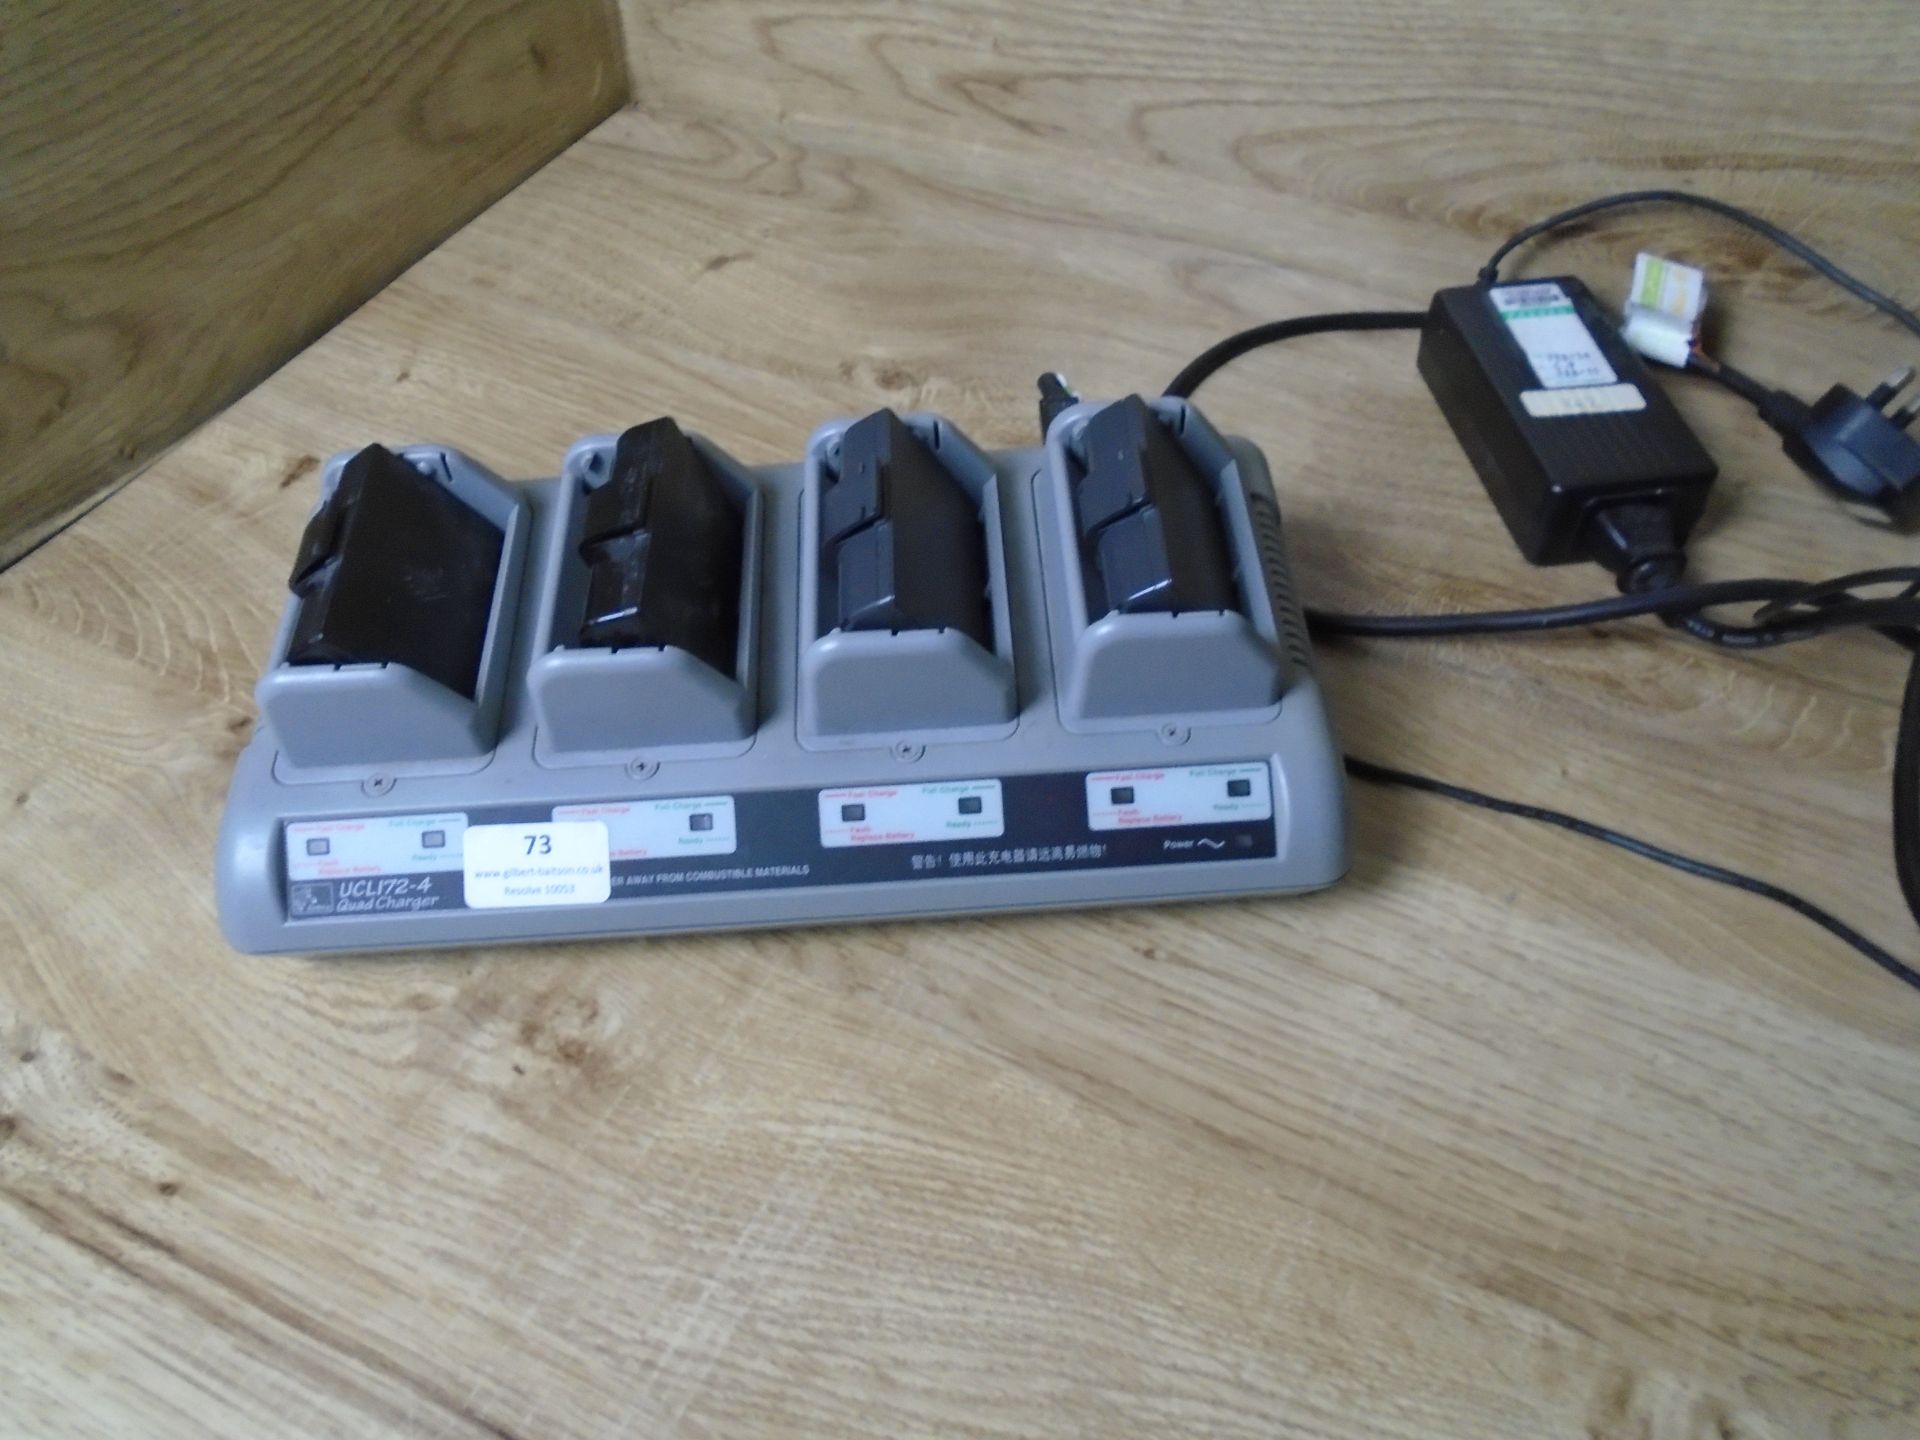 * UCL172-4 Quad Charger with 4 batteries